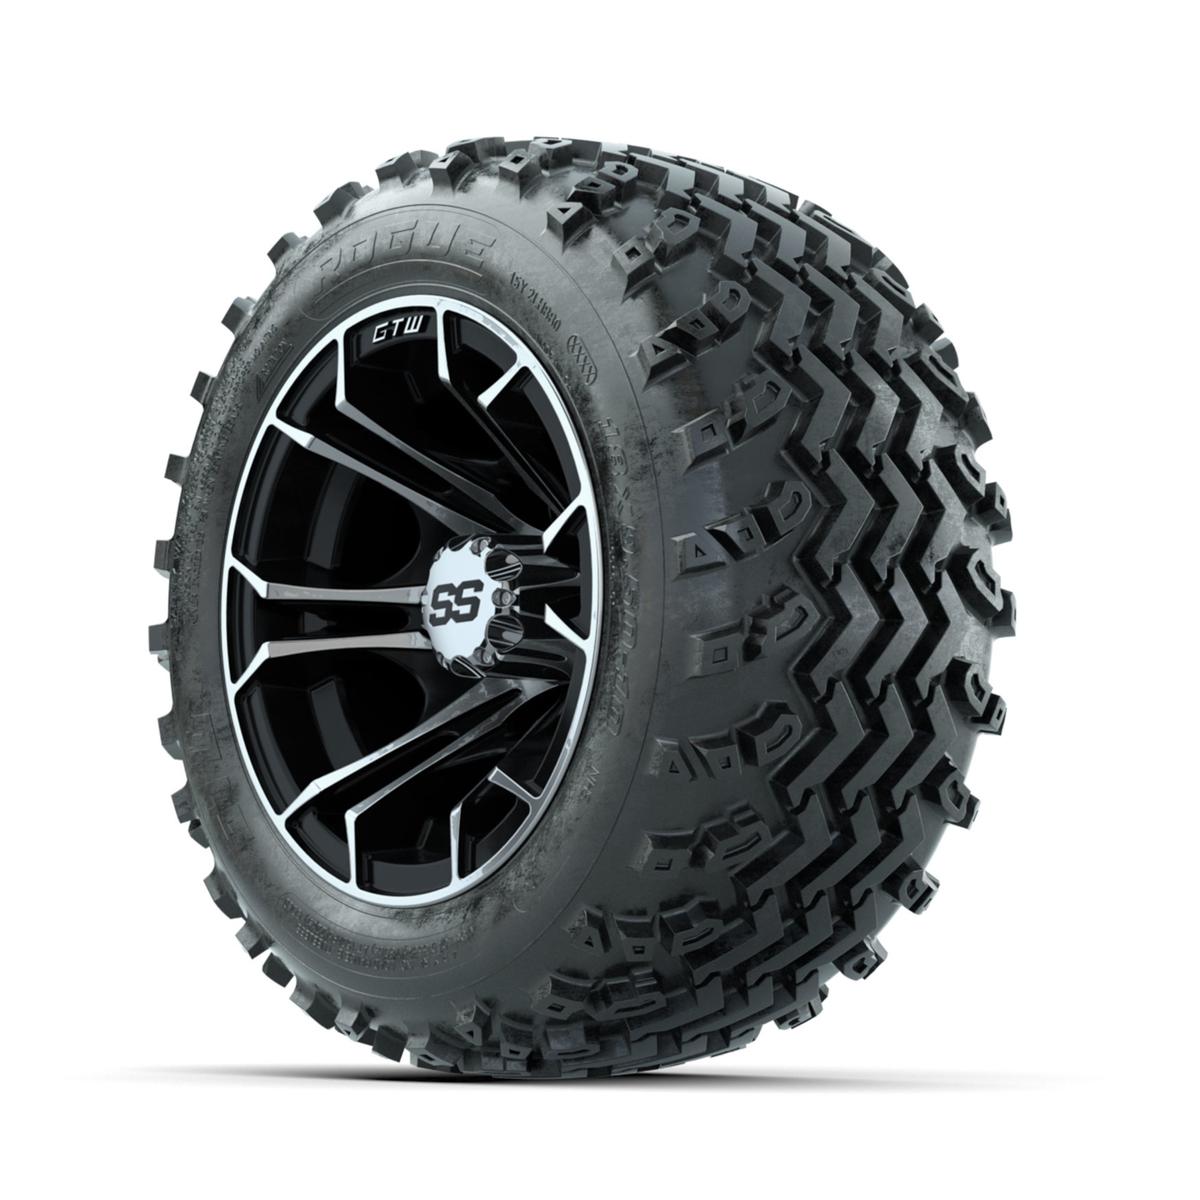 GTW Spyder Machined/Black 10 in Wheels with 18x9.50-10 Rogue All Terrain Tires – Full Set